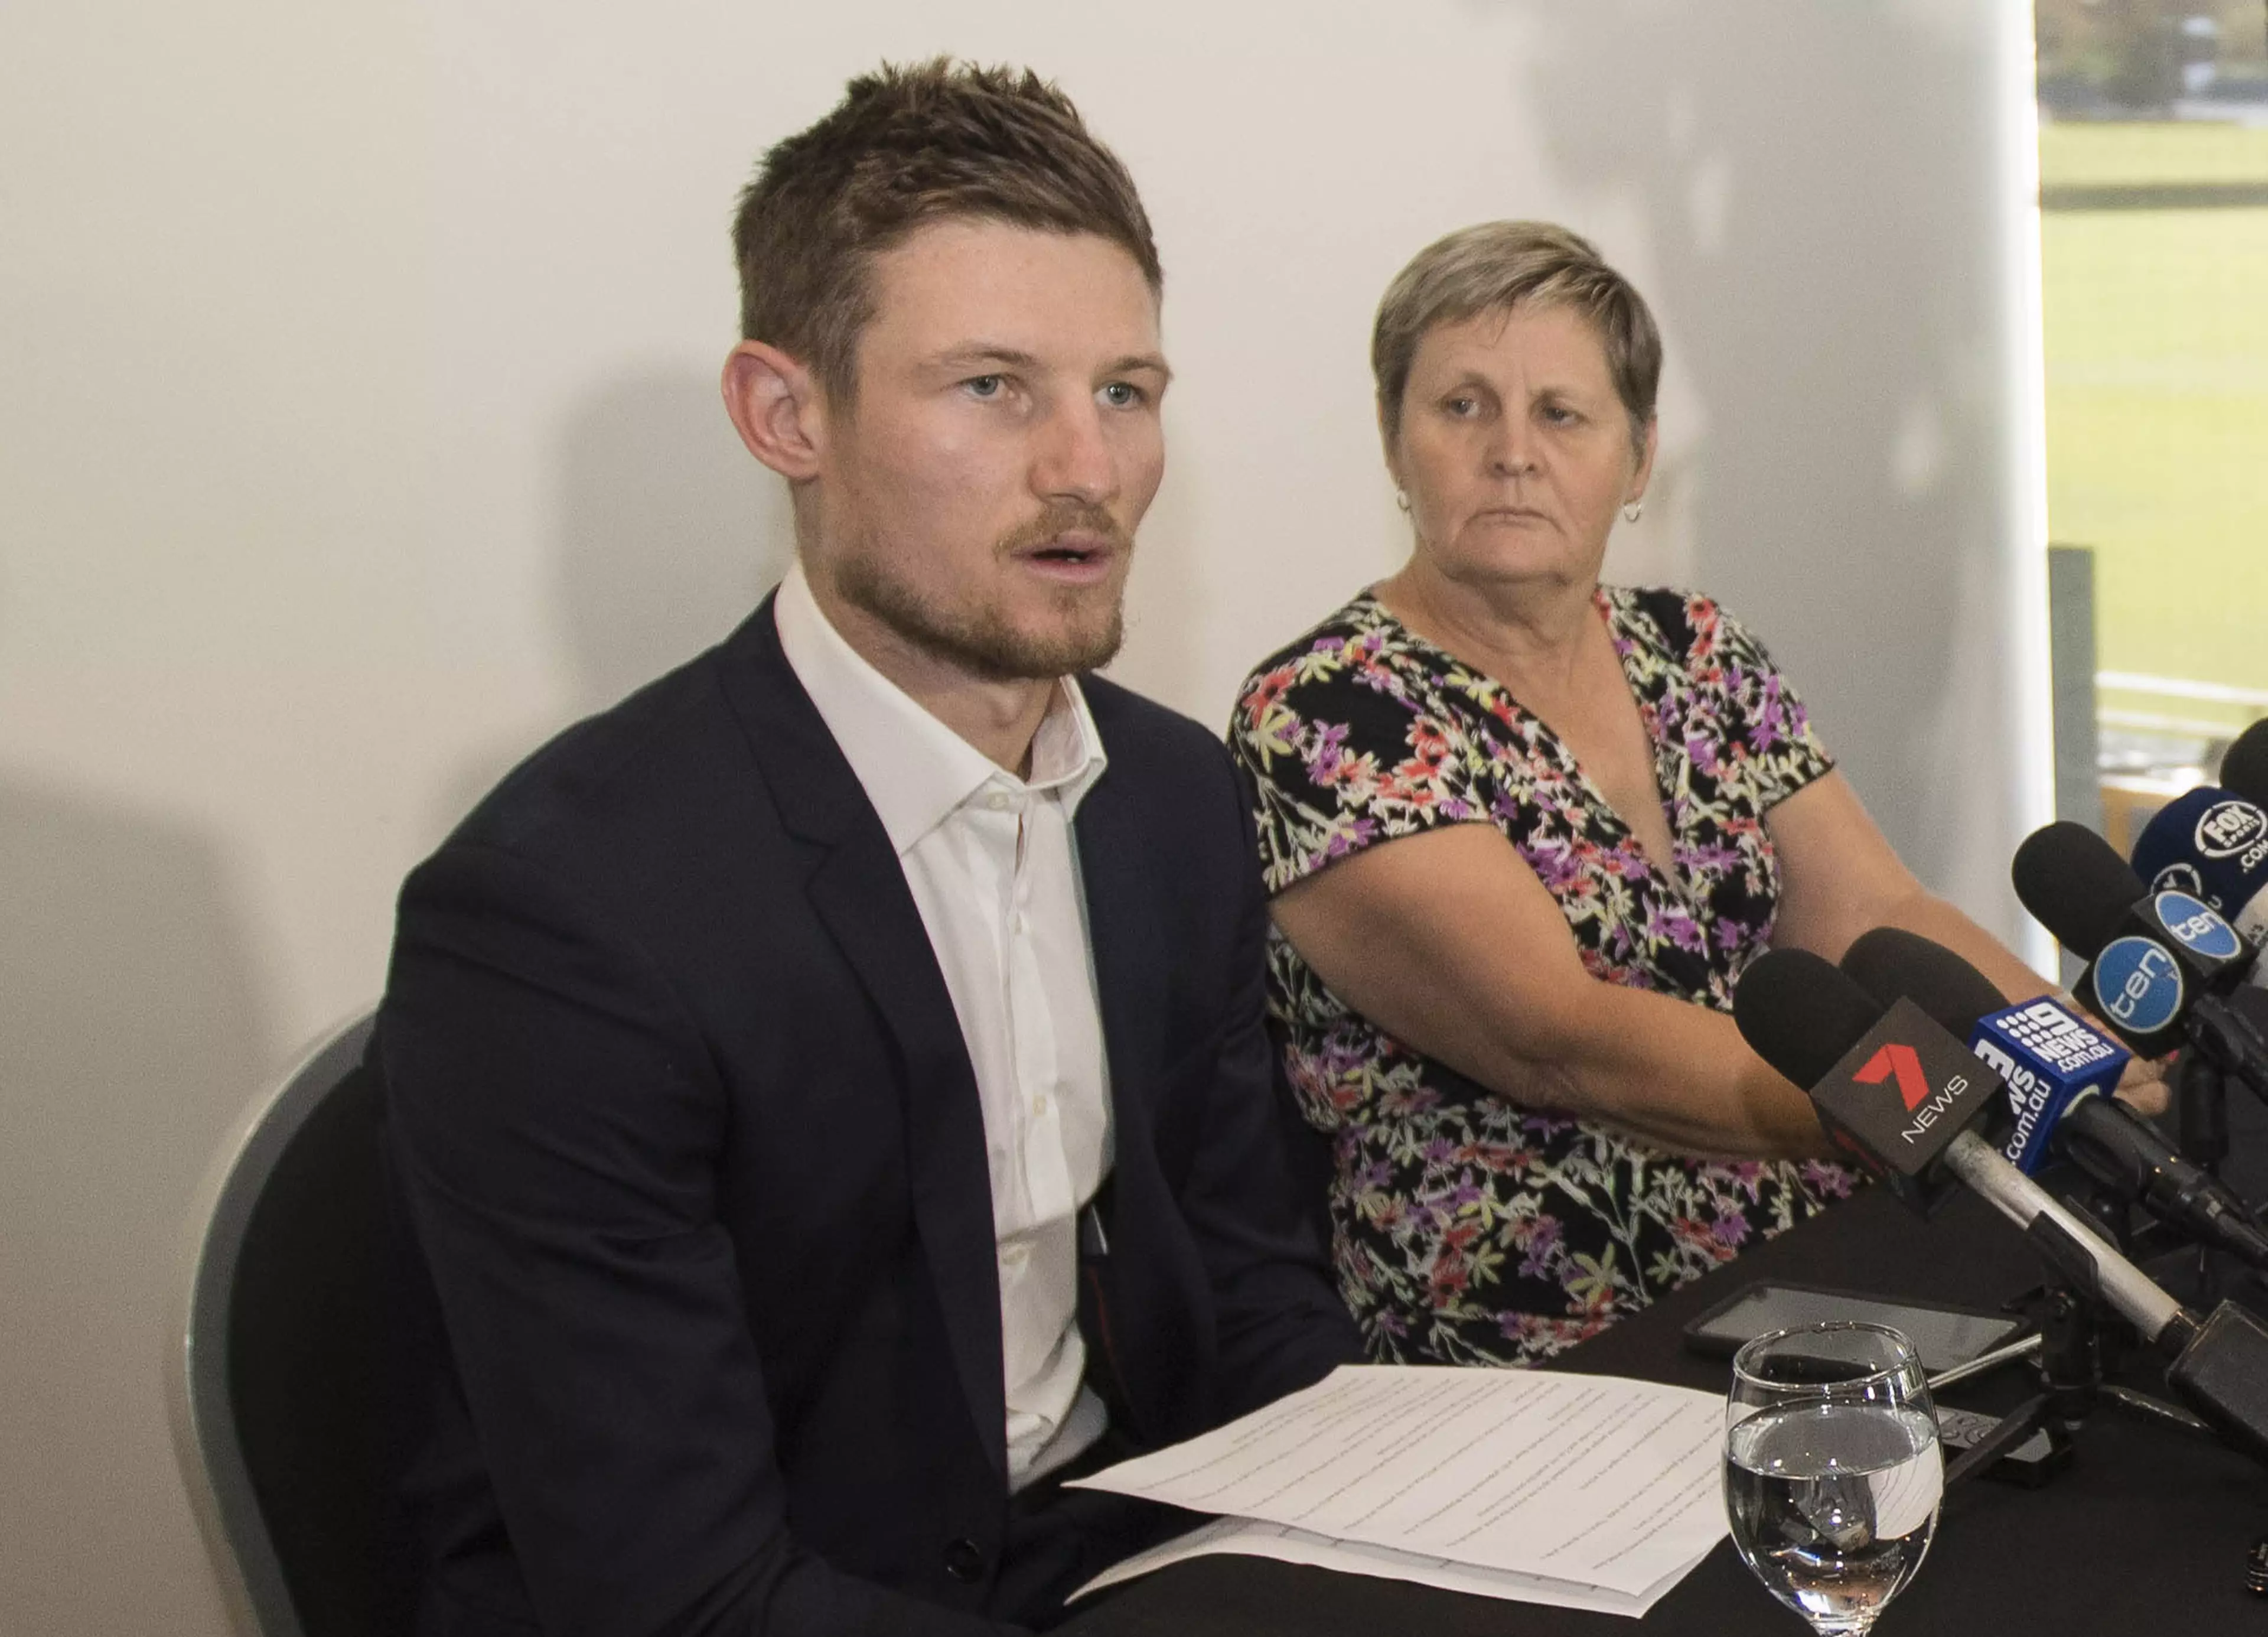 Bancroft gives his own press conference. Image: PA Images